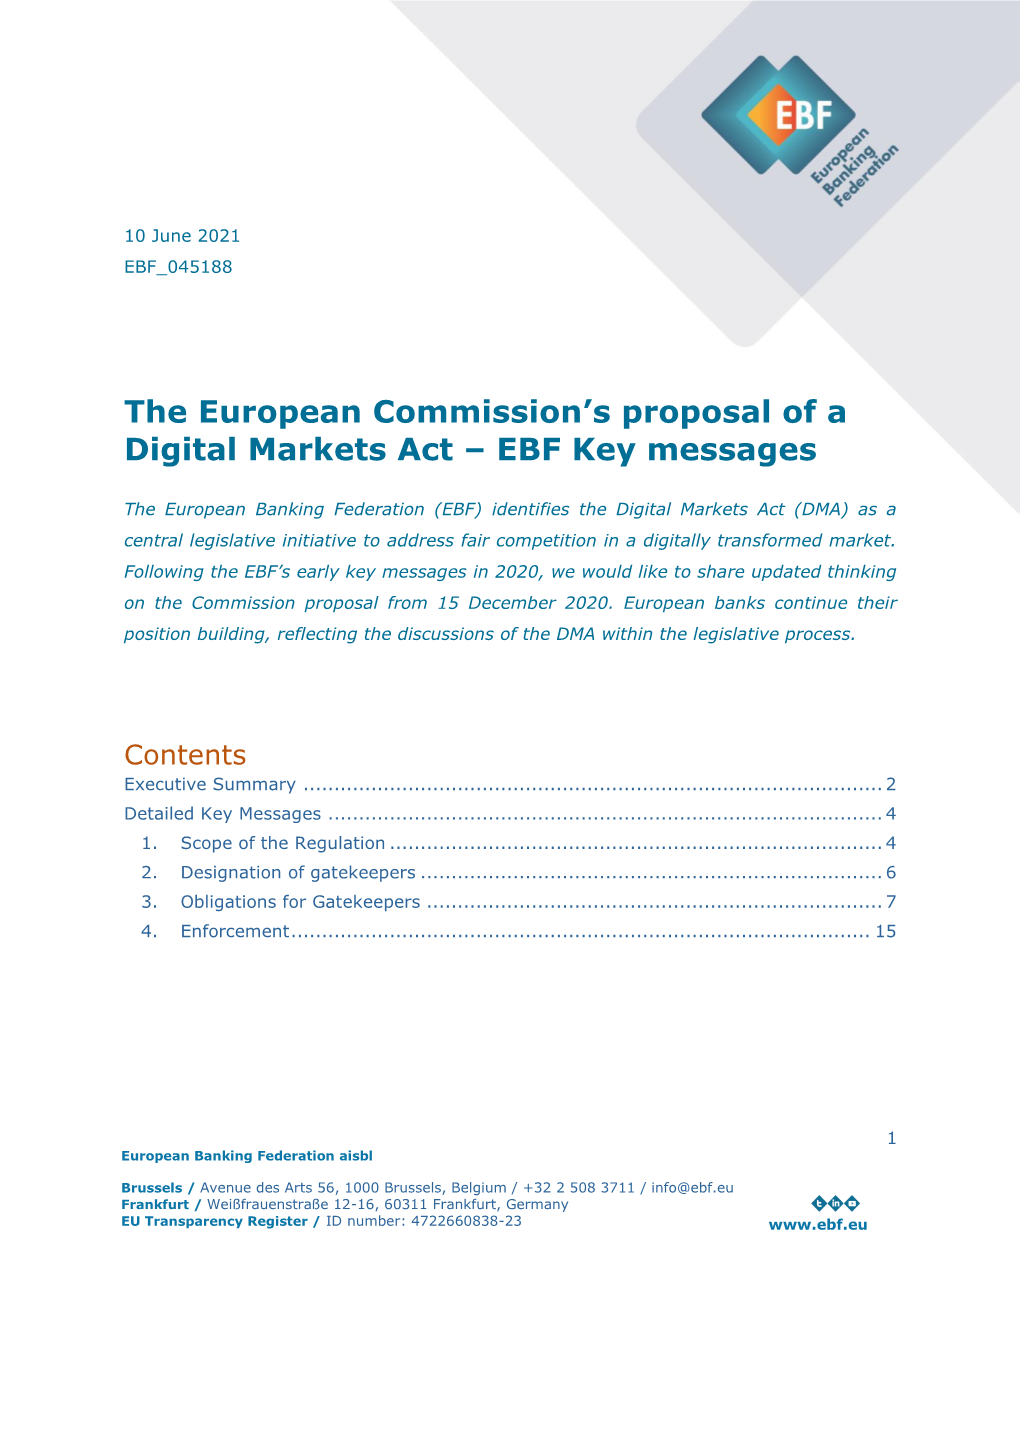 The European Commission's Proposal of a Digital Markets